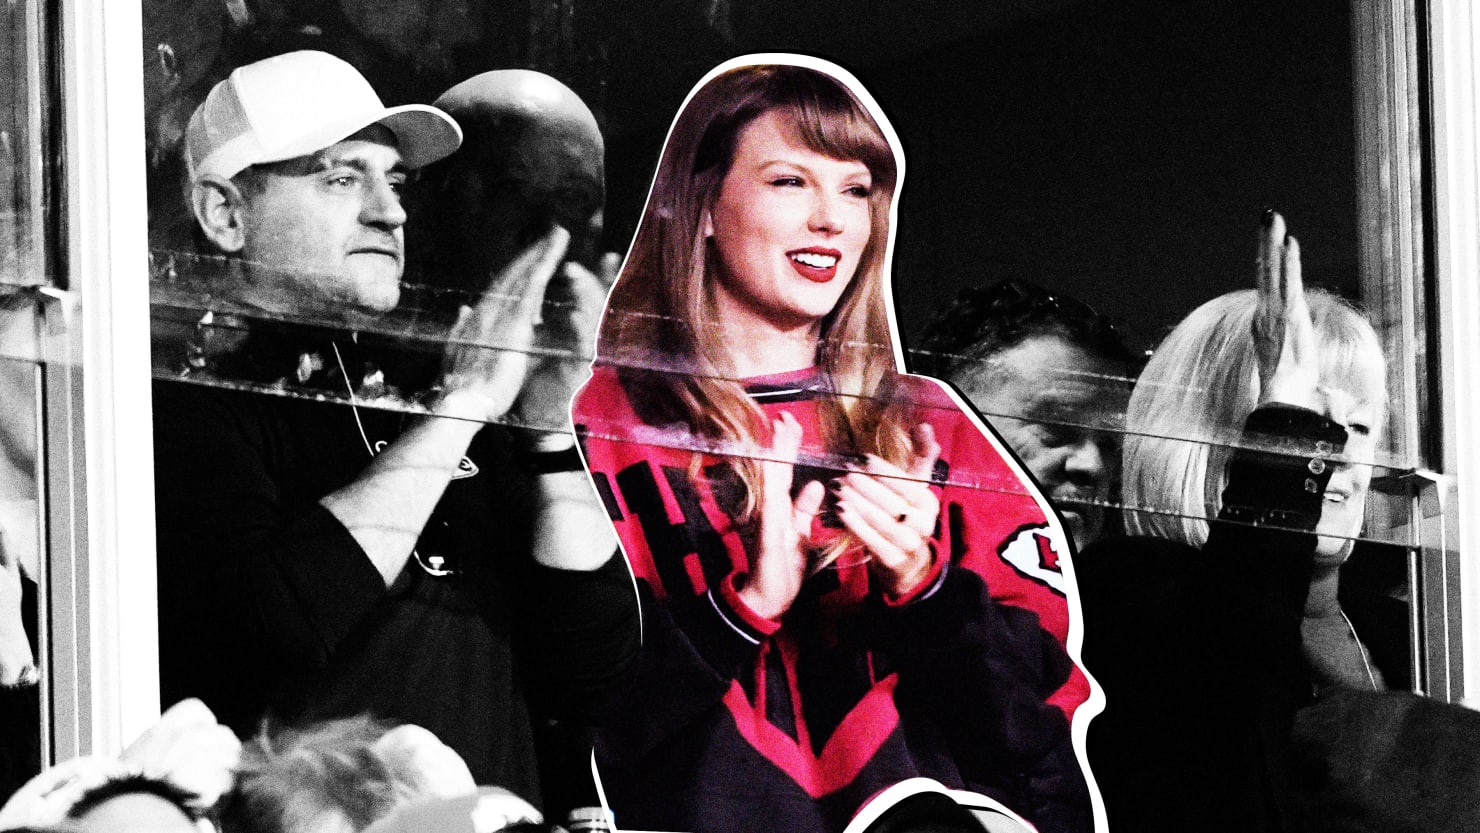 Where did Taylor Swift get her Chiefs jacket? Her game-day oufit